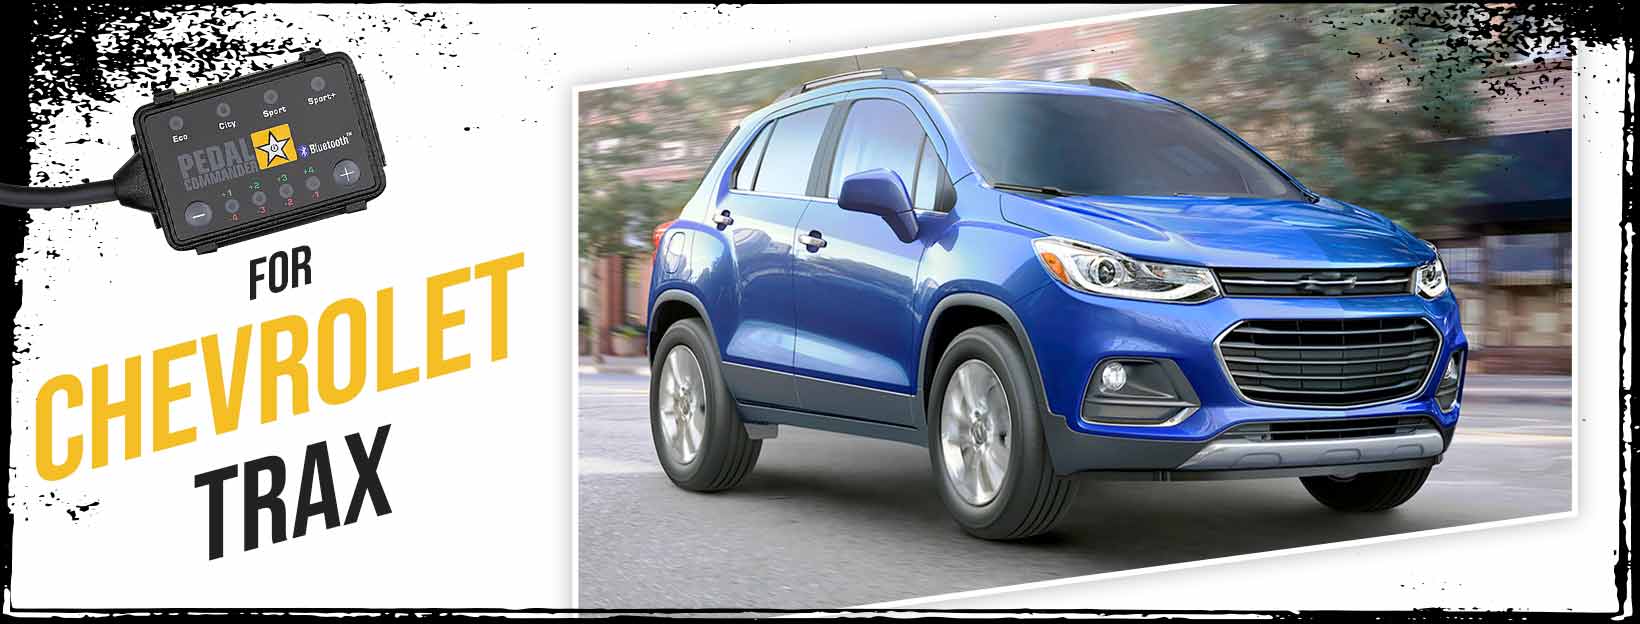 Pedal Commander for Chevrolet Trax